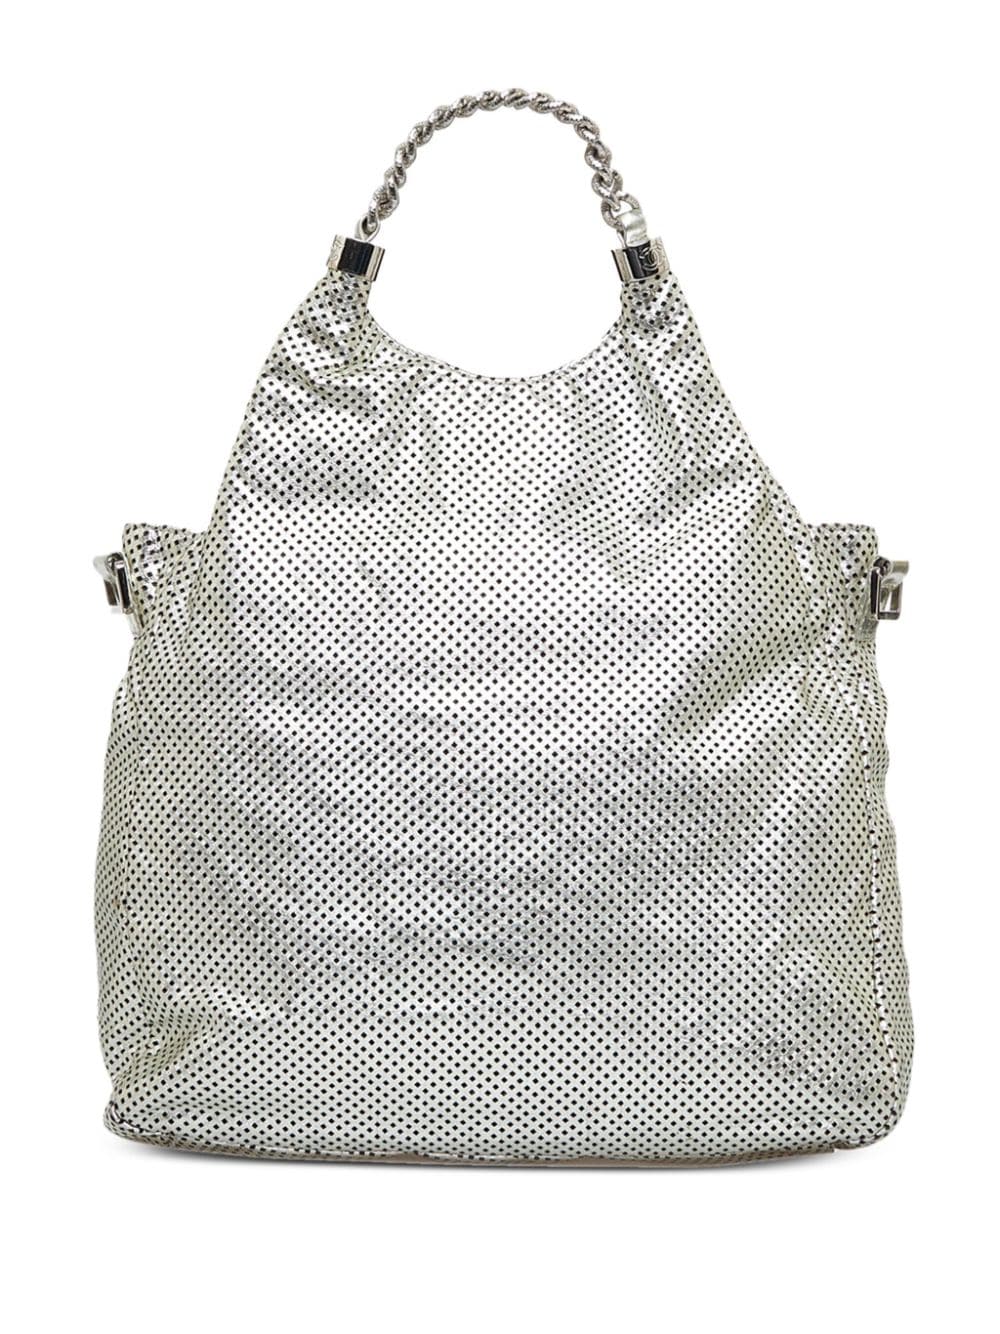 Chanel Metallic Rodeo Drive Tote (SHG-37071) – LuxeDH